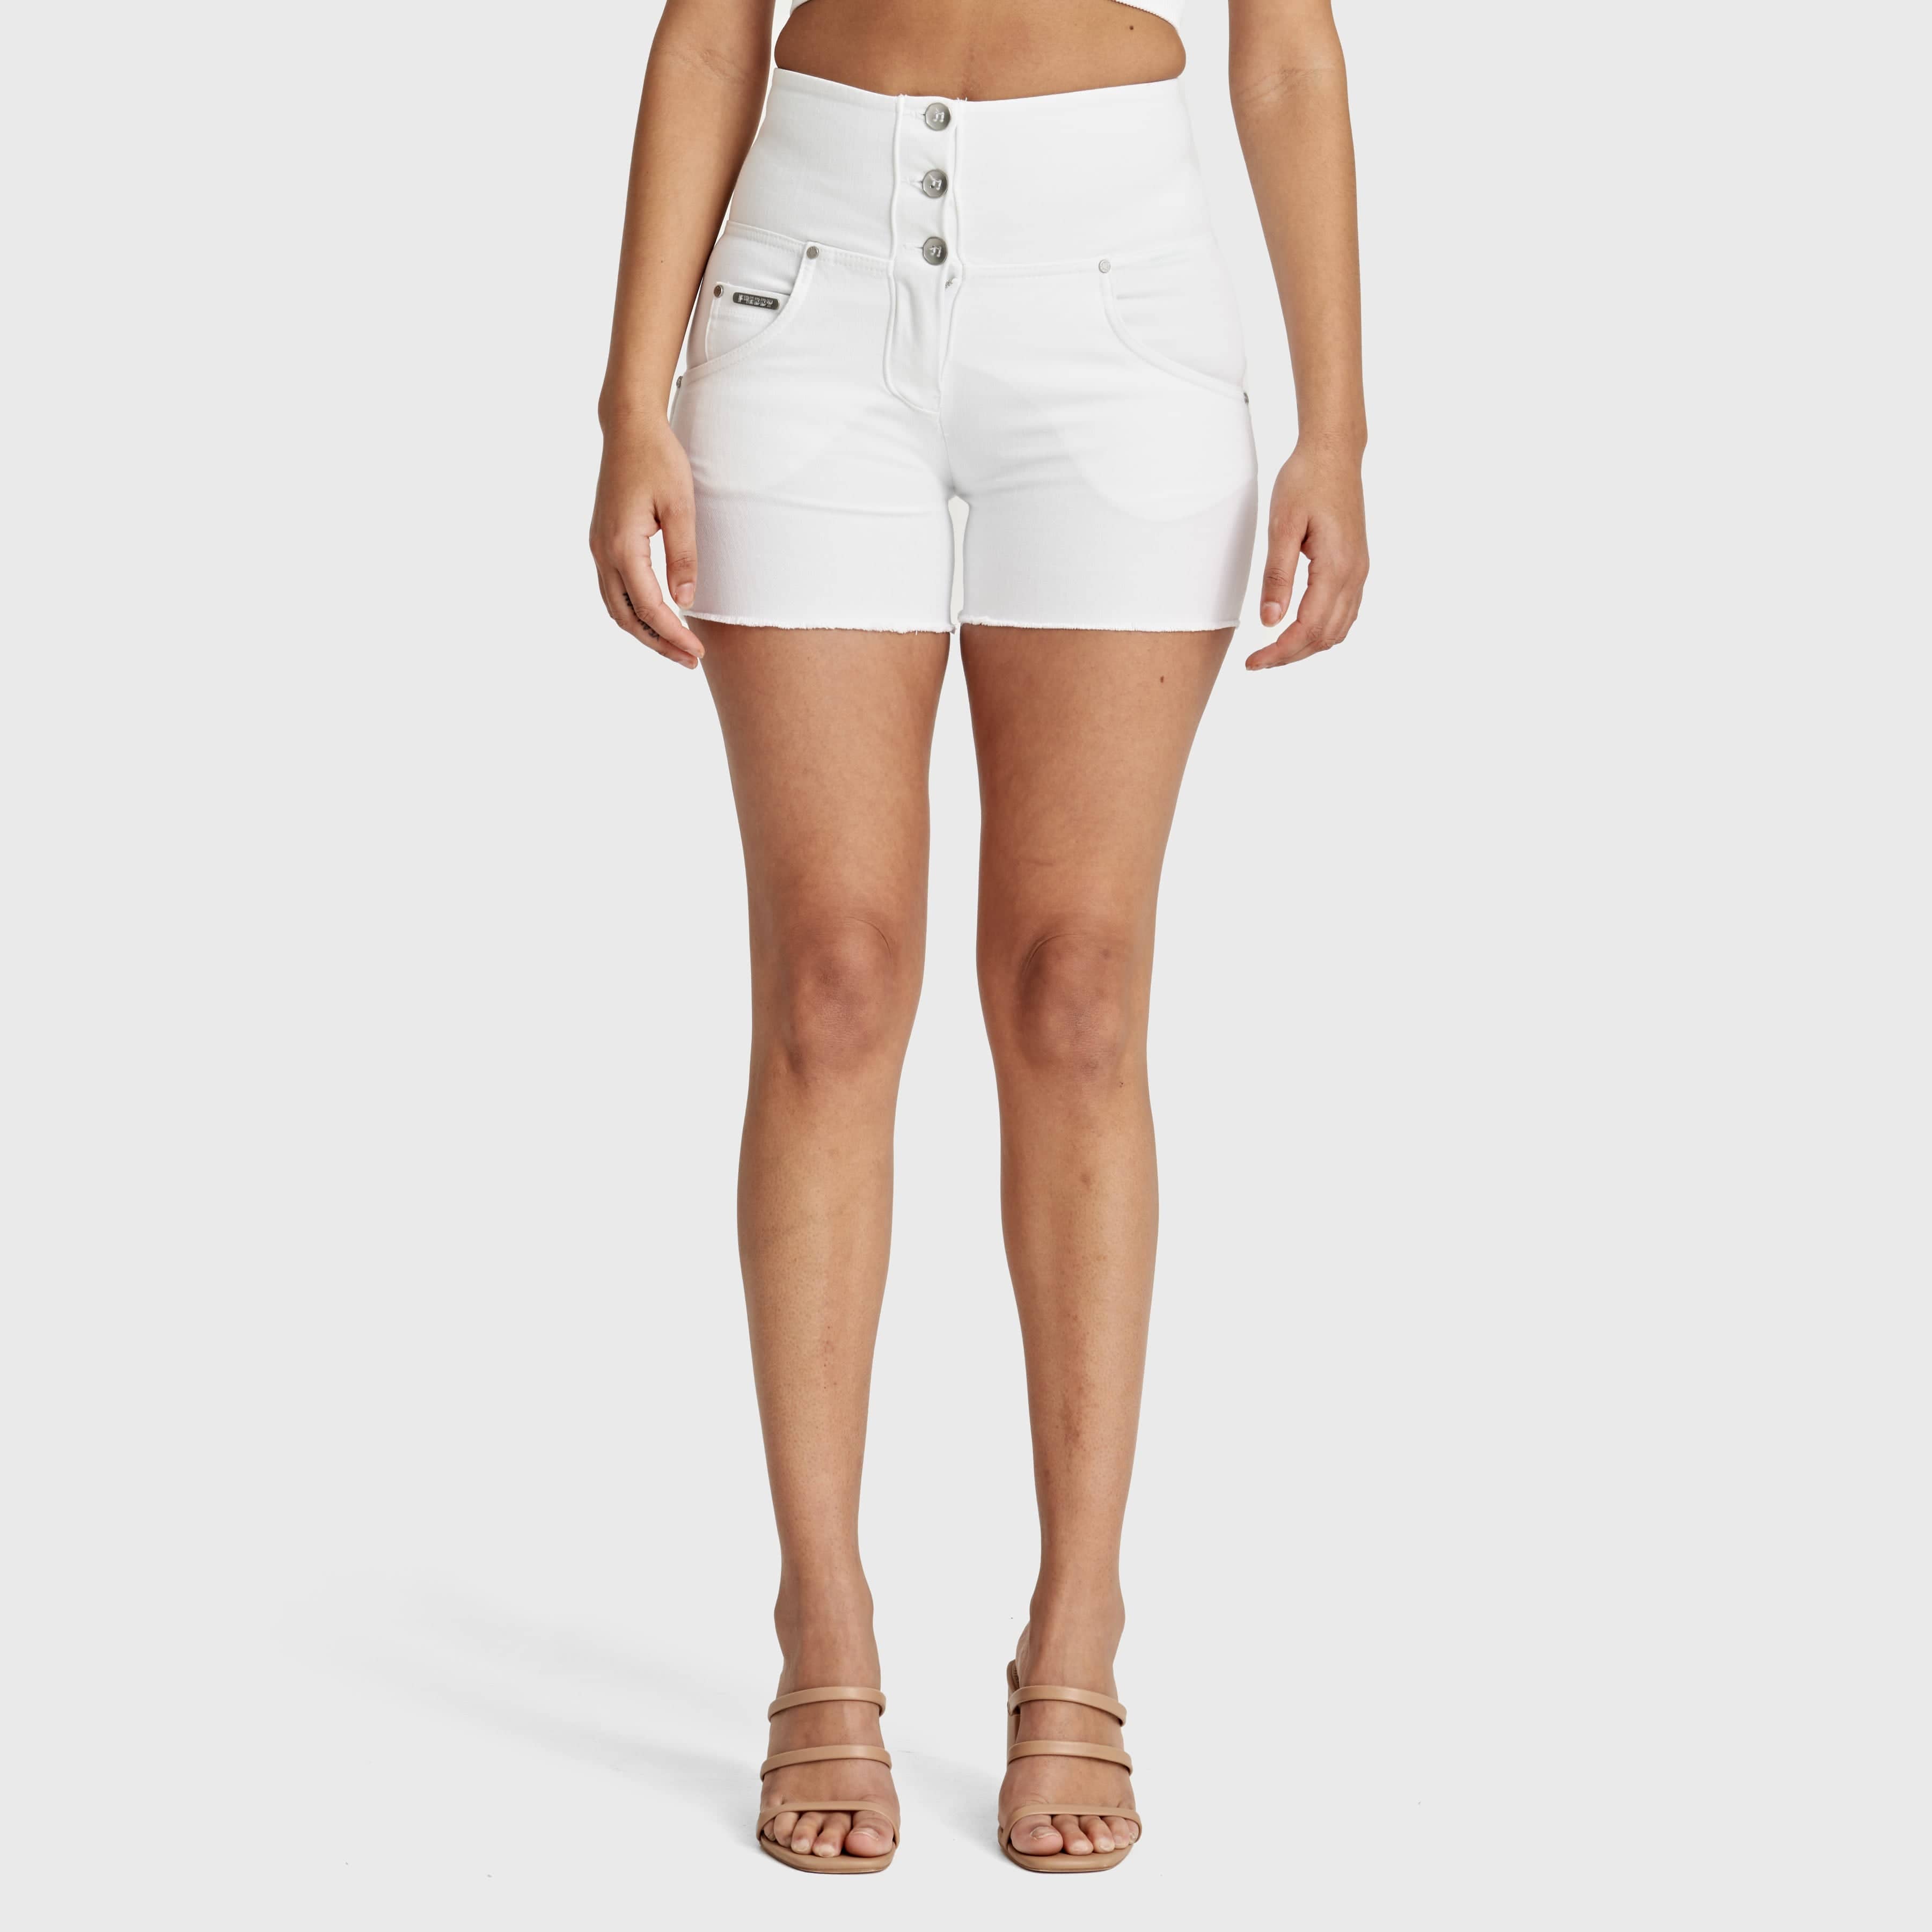 WR.UP® Snug Jeans - High Waisted - Shorts - White 2